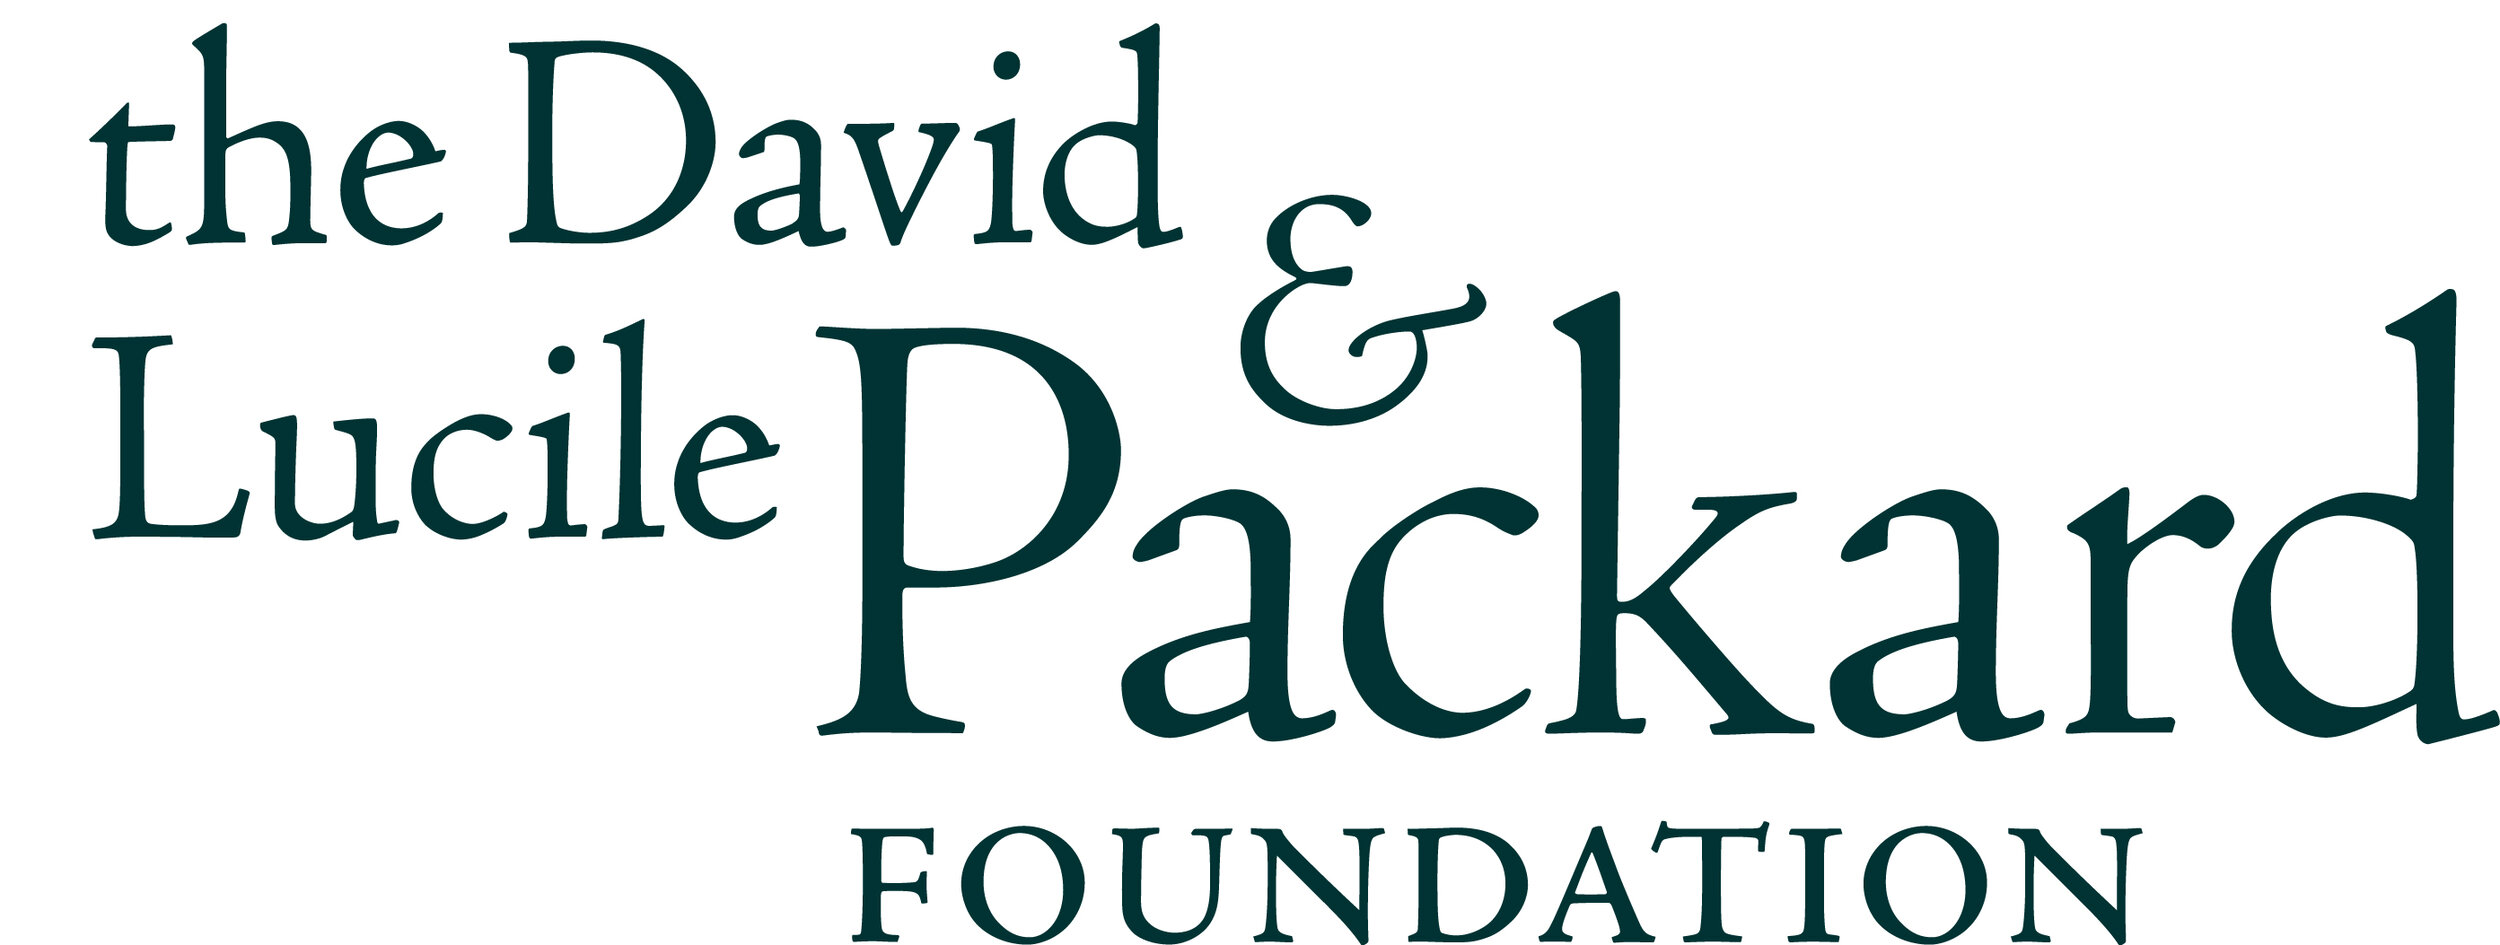 David and Lucile Packard Foundation.jpg